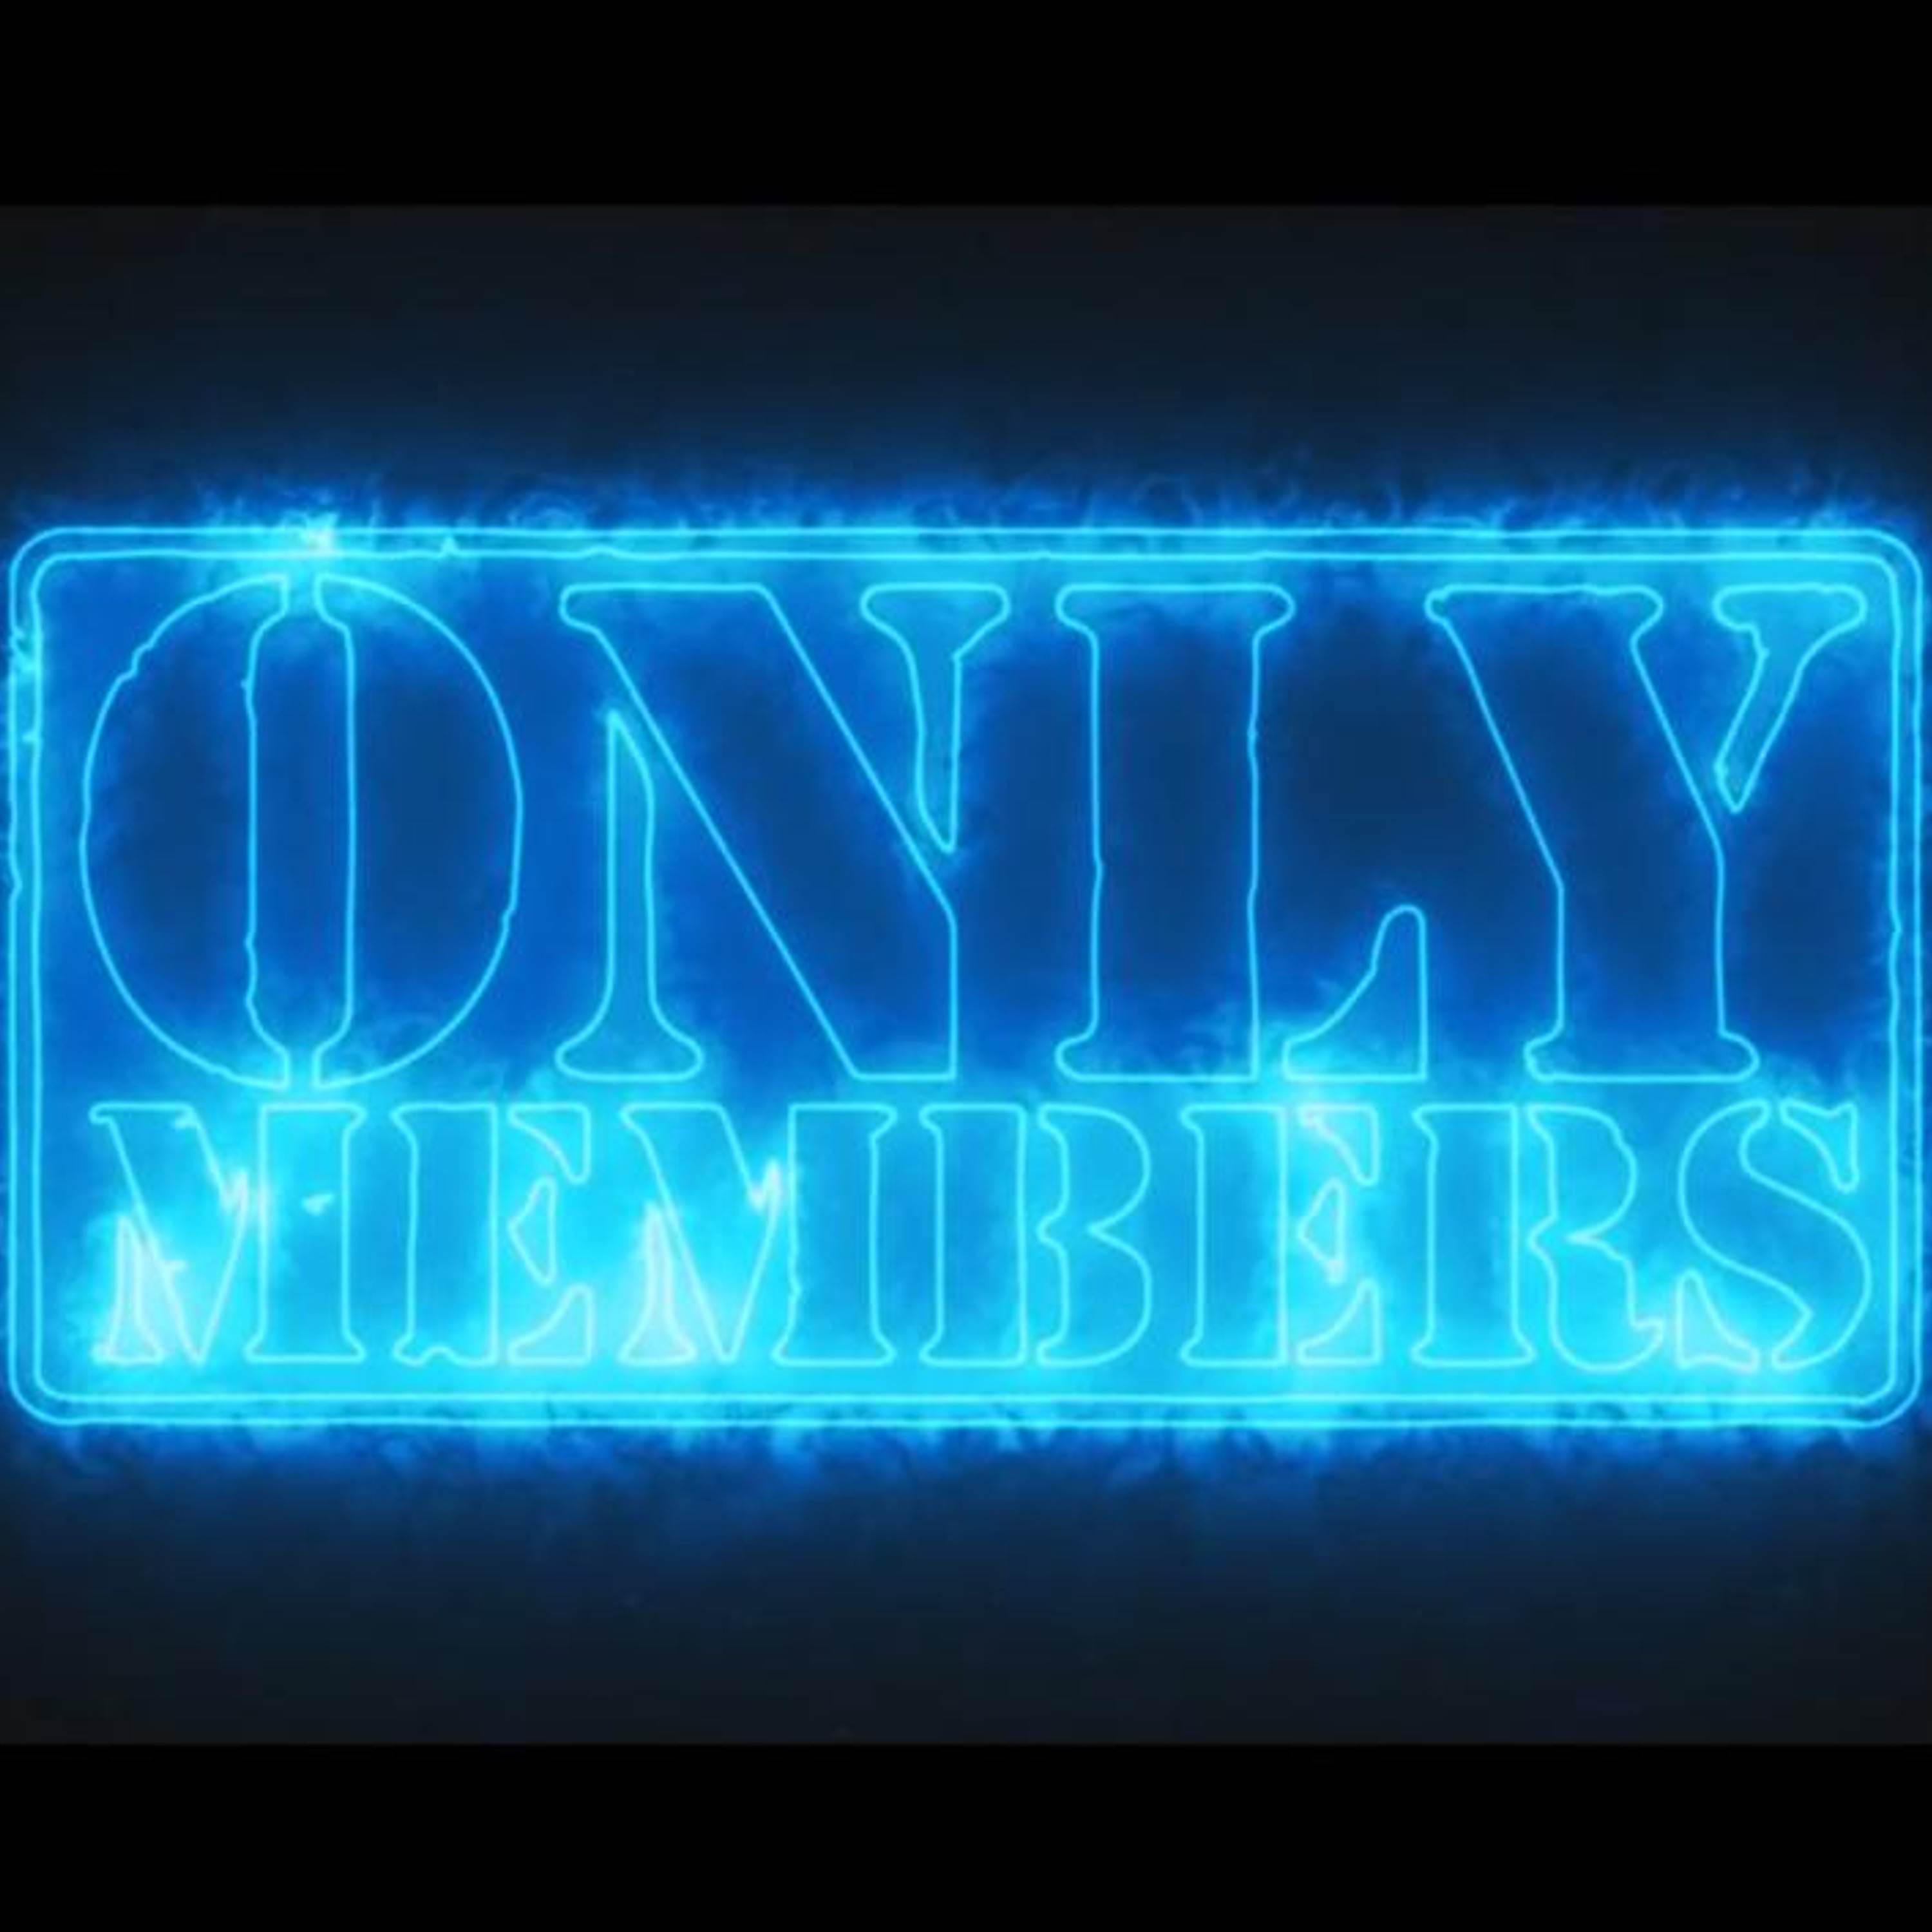 Only Members